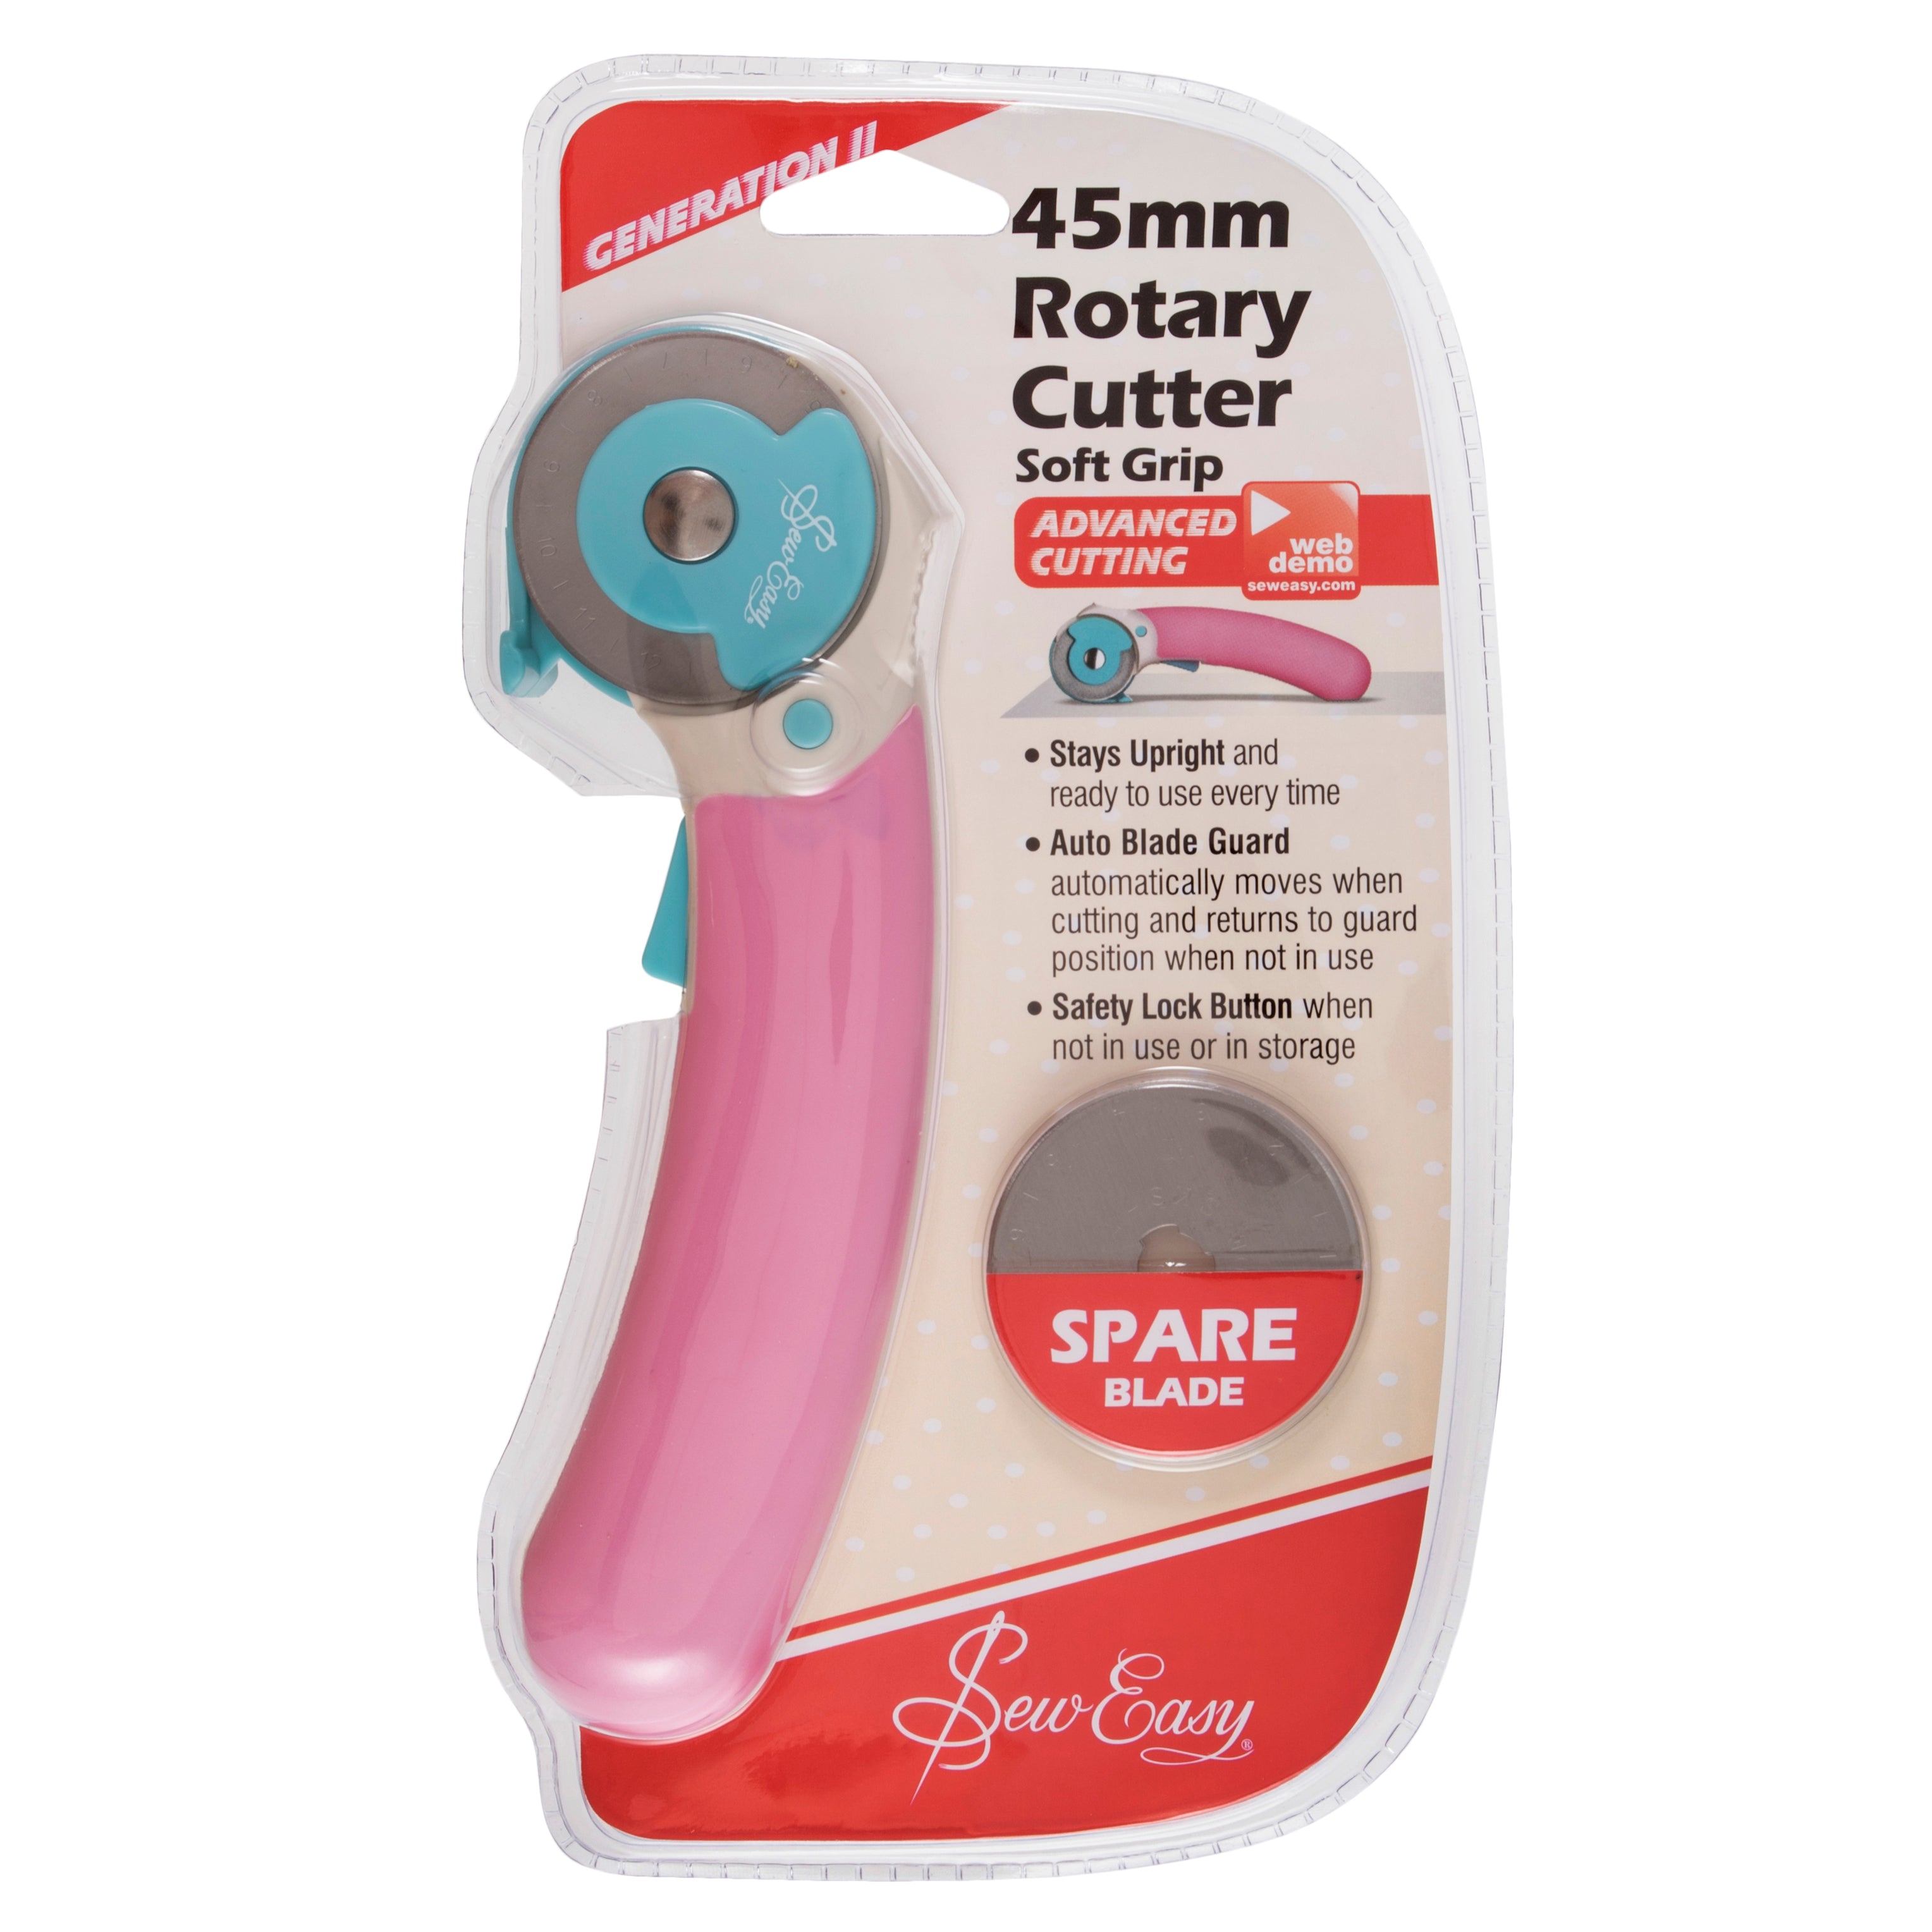 Sew Easy Generation II Rotary Cutter - with spare blade